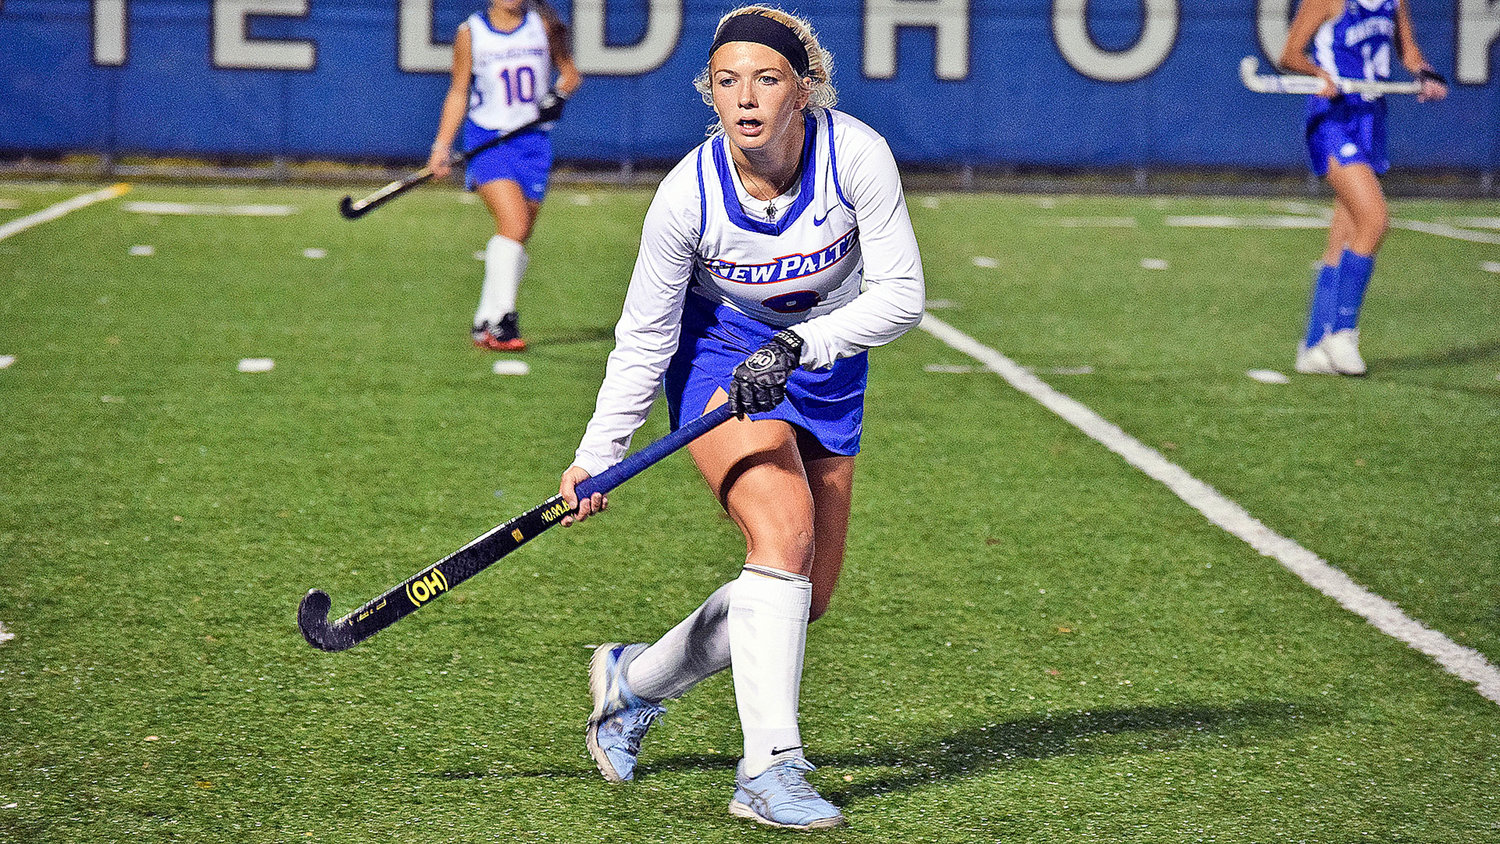 SUNY New Paltz field hockey star Natasia Plunkett, a Holland Patent graduate, has been named SUNYAC Offensive Player of the Year. Plunkett was the Hawks’ leading scorer with 33 points on 15 goals — the fourth-most in program history — and three assists